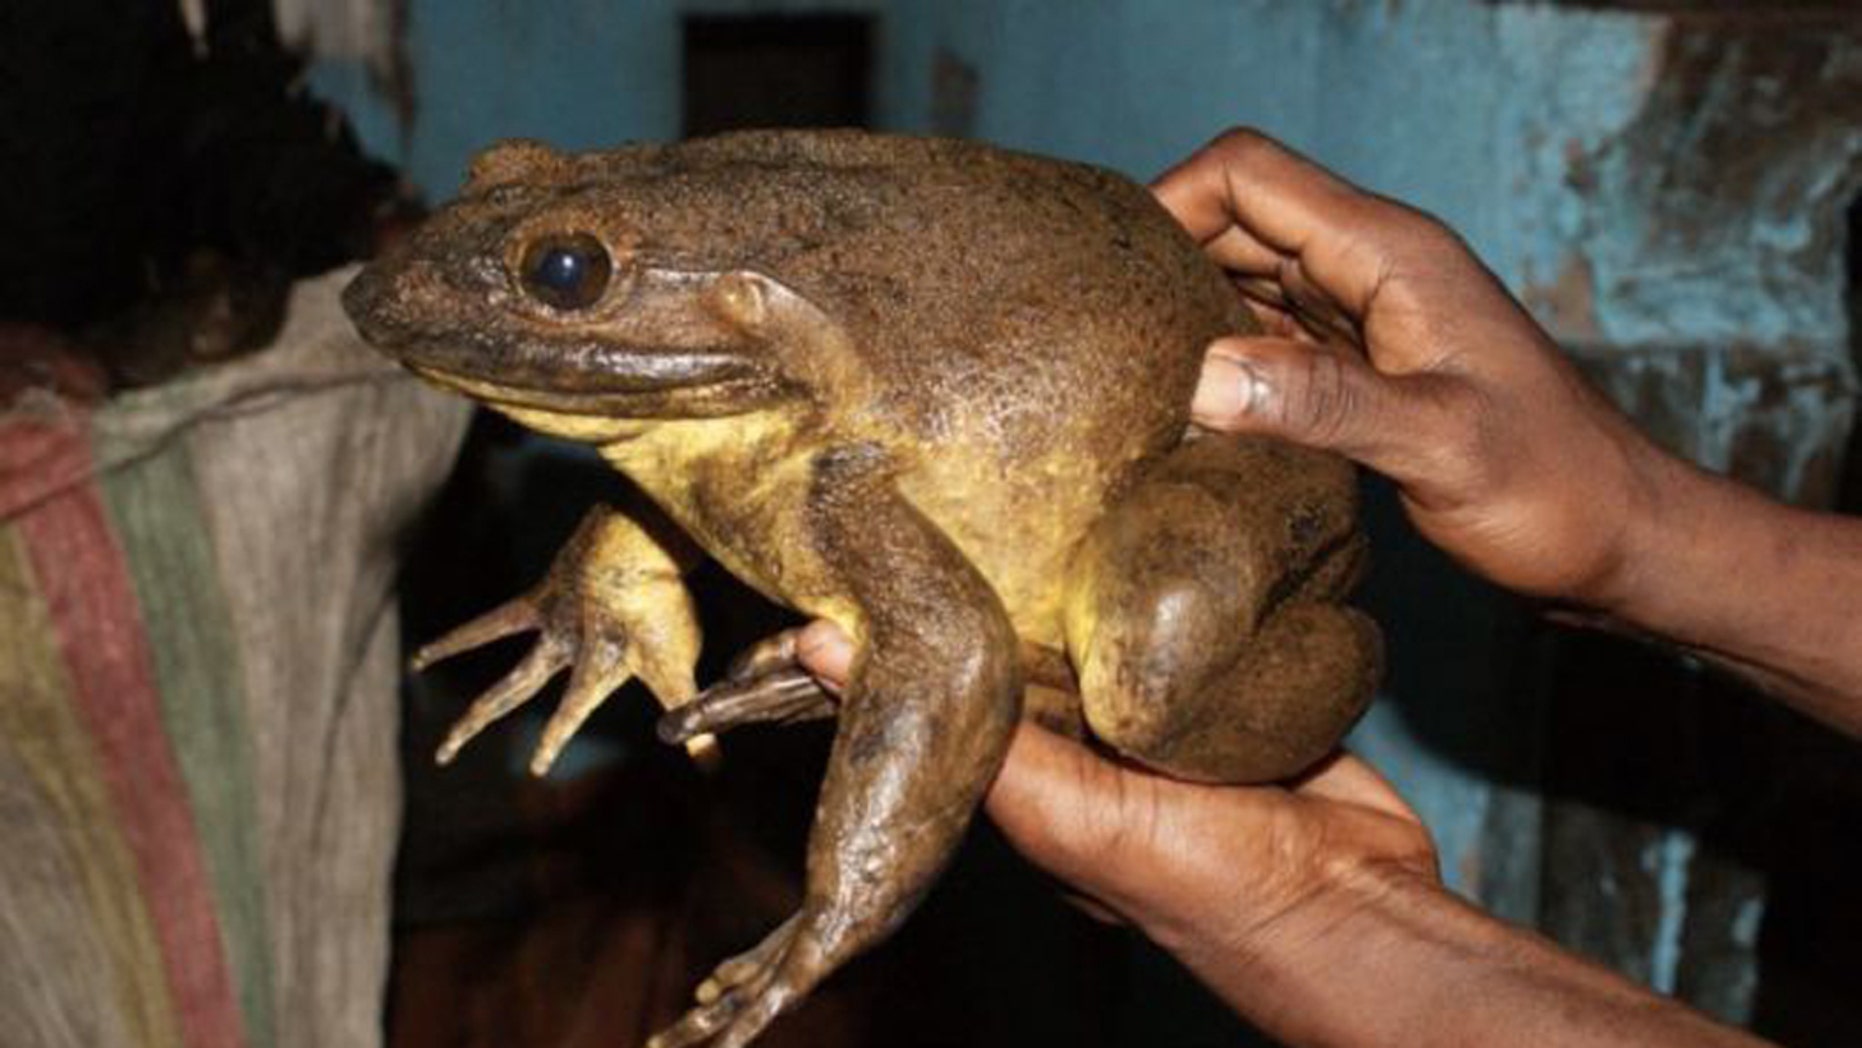 World's largest frogs can move rocks half their weight 3